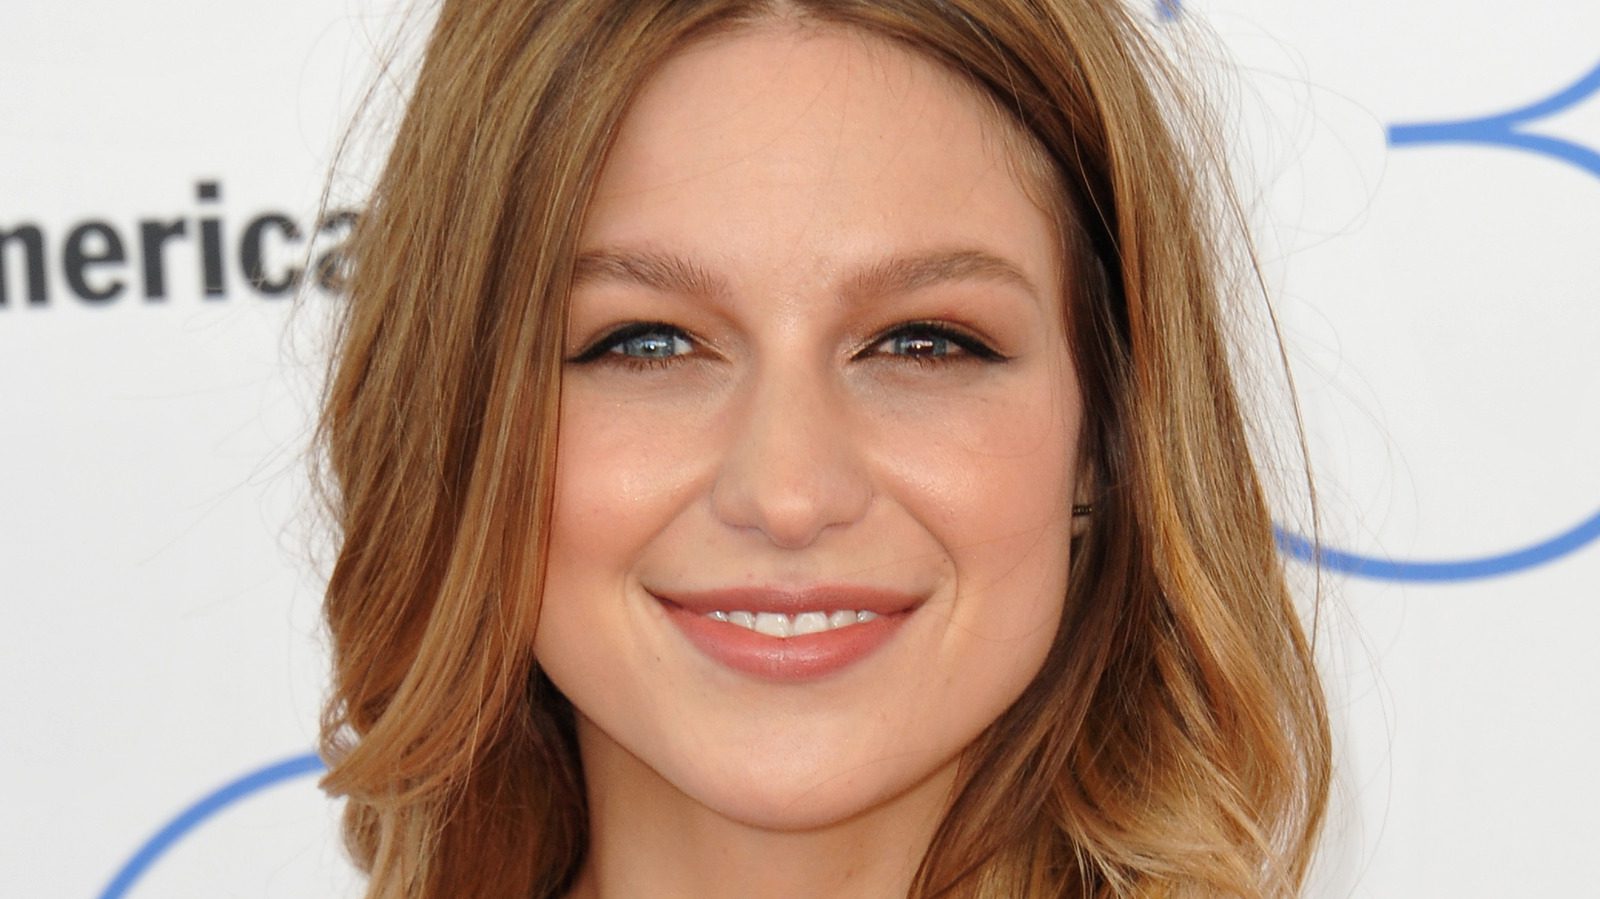 Stunning Fan Art Brings Melissa Benoist To Life As The Fantastic Four's Sue Storm